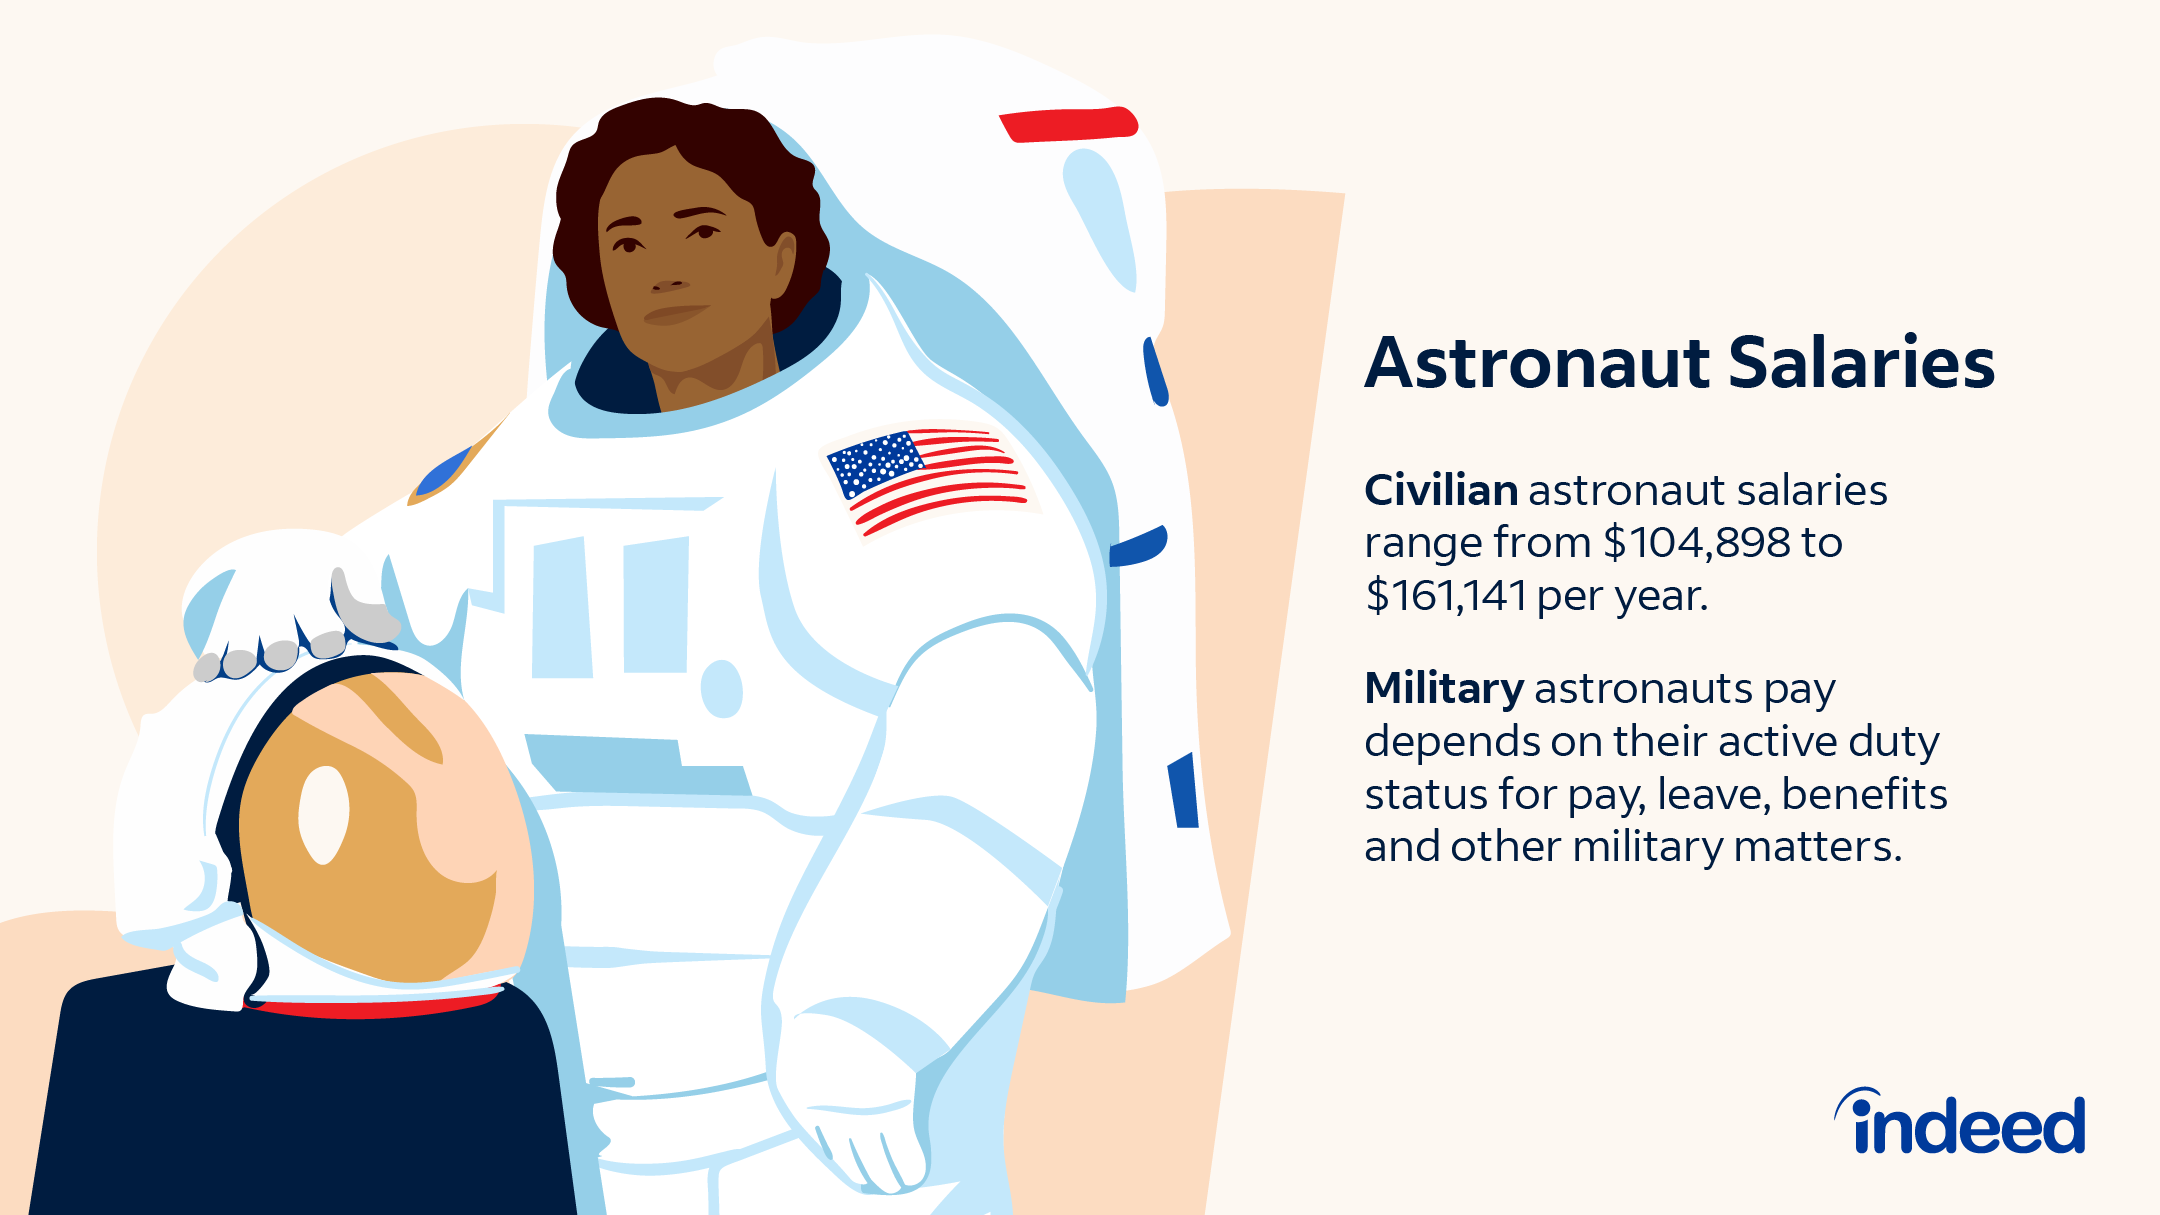 What is an astronaut salary?